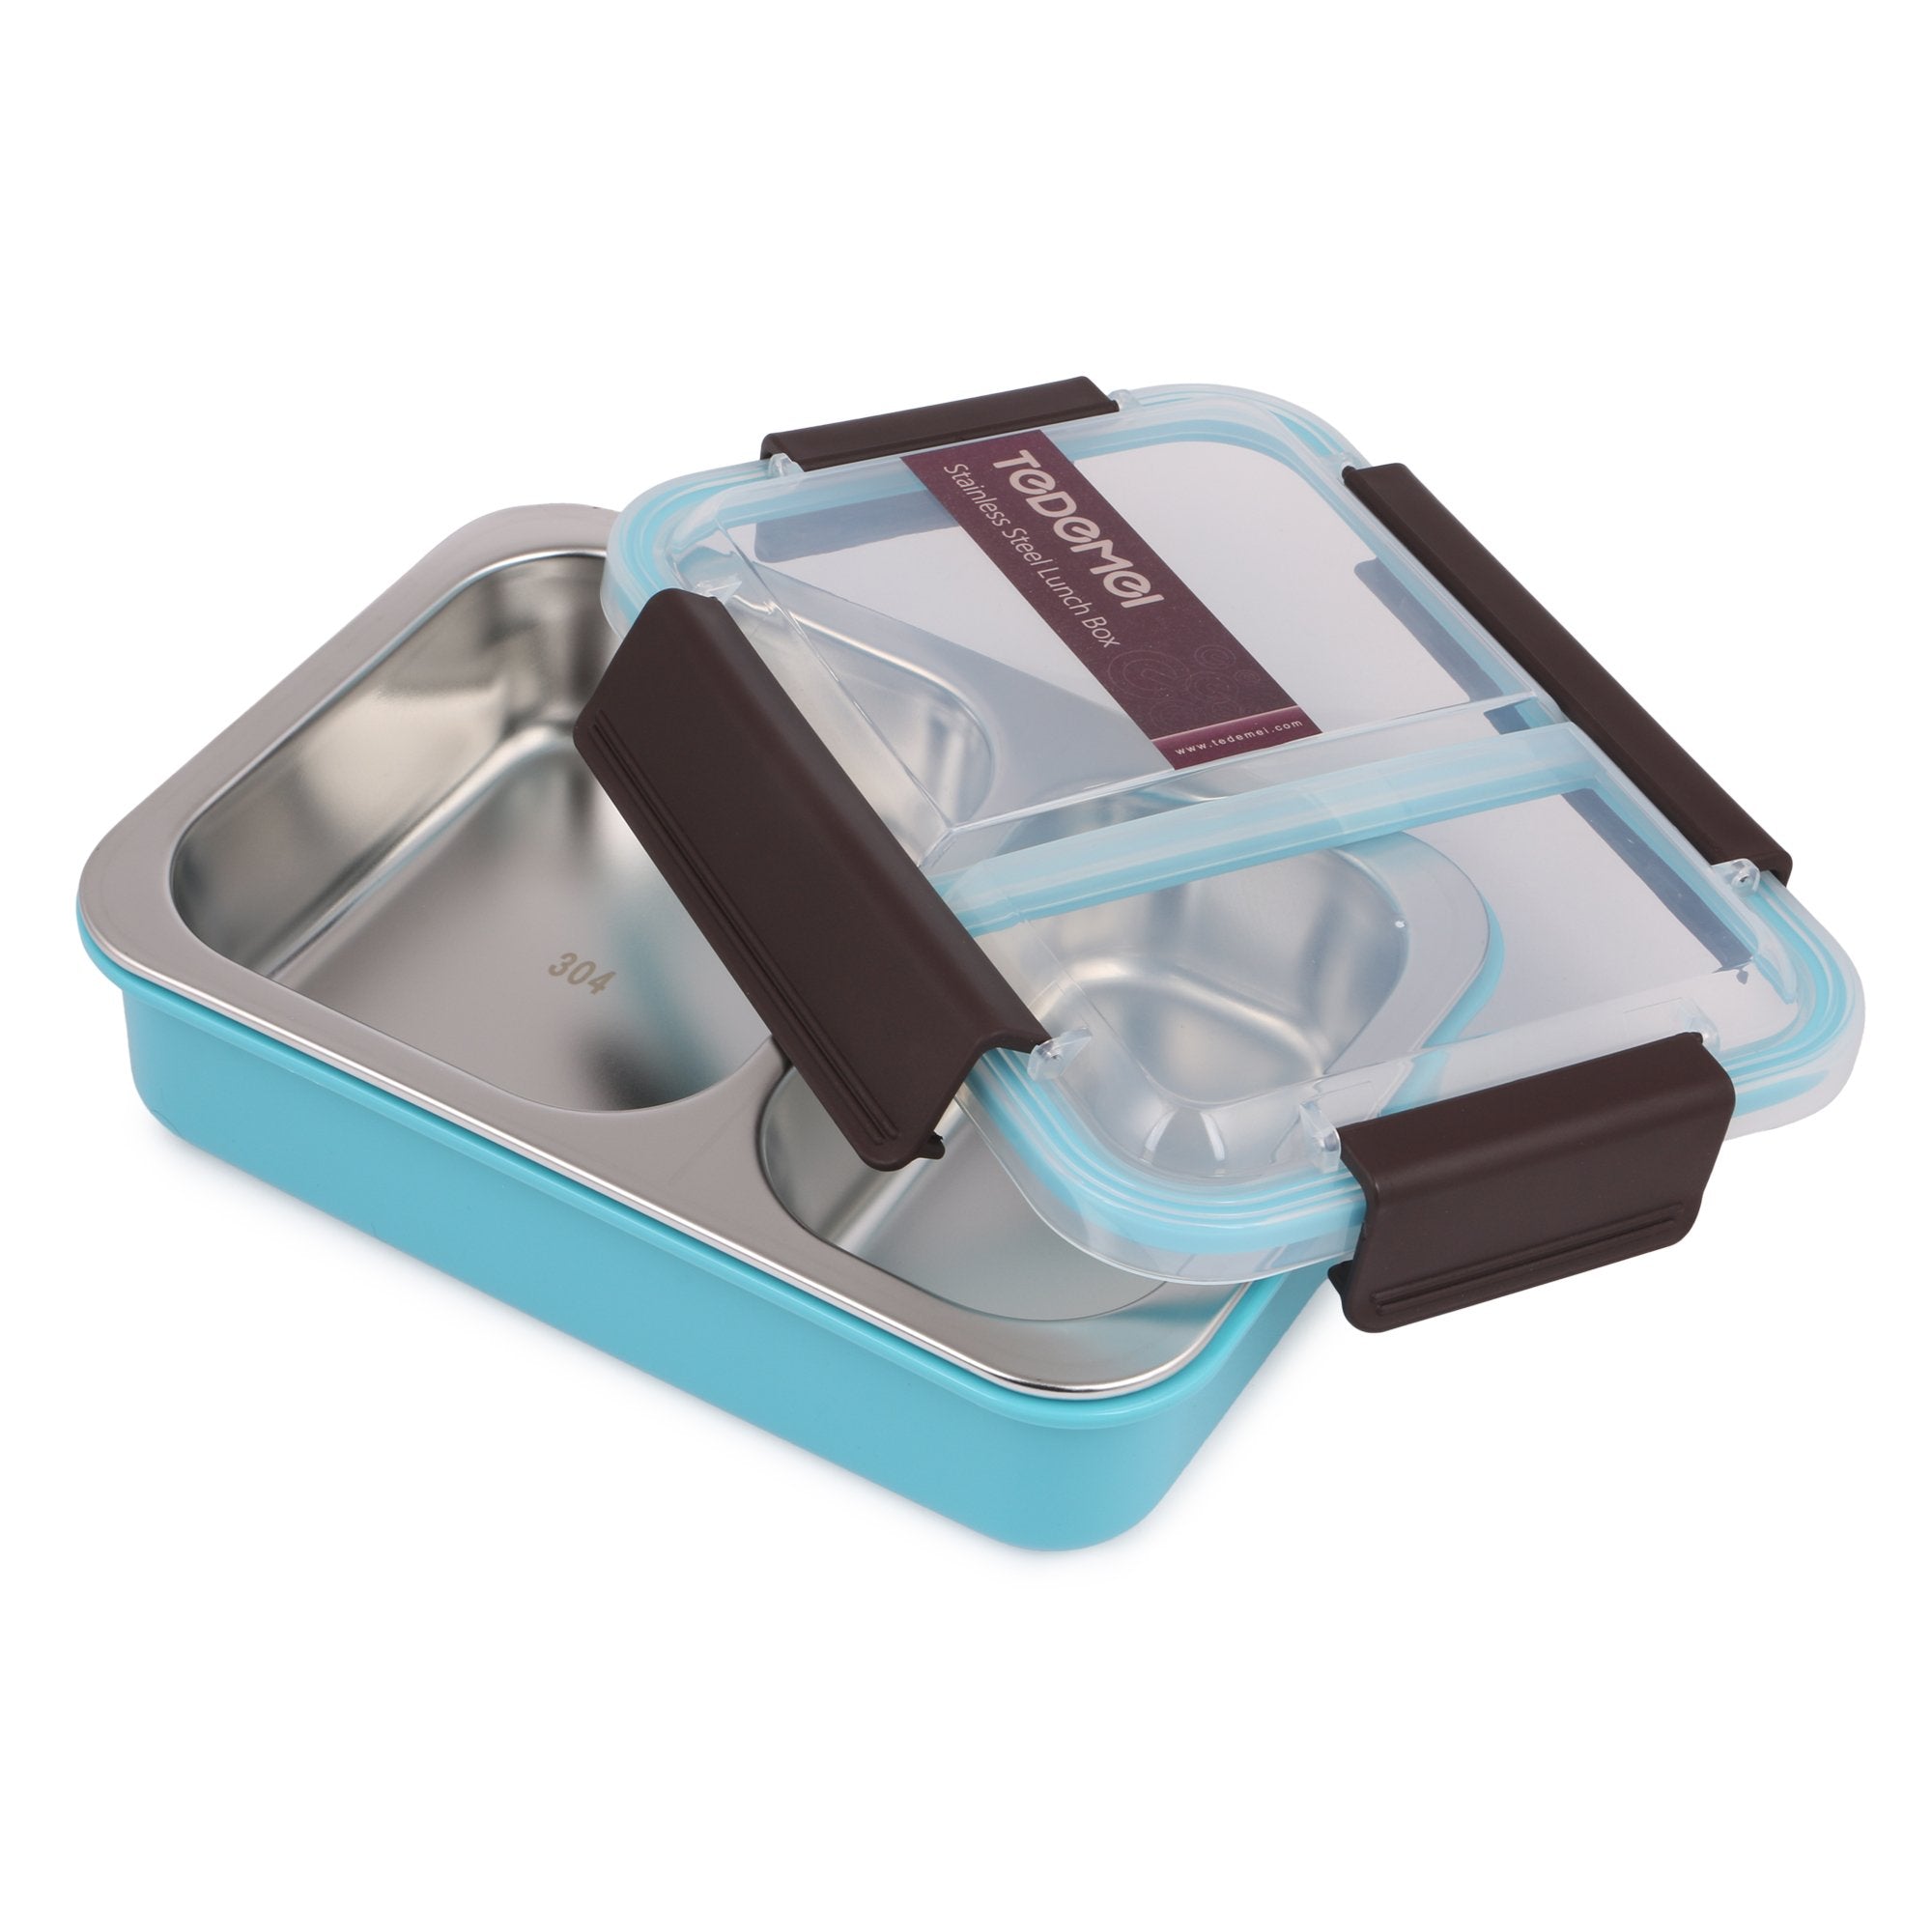 Stainless Steel Insulated 2 Compartment Lunch Box, 750ML 6561